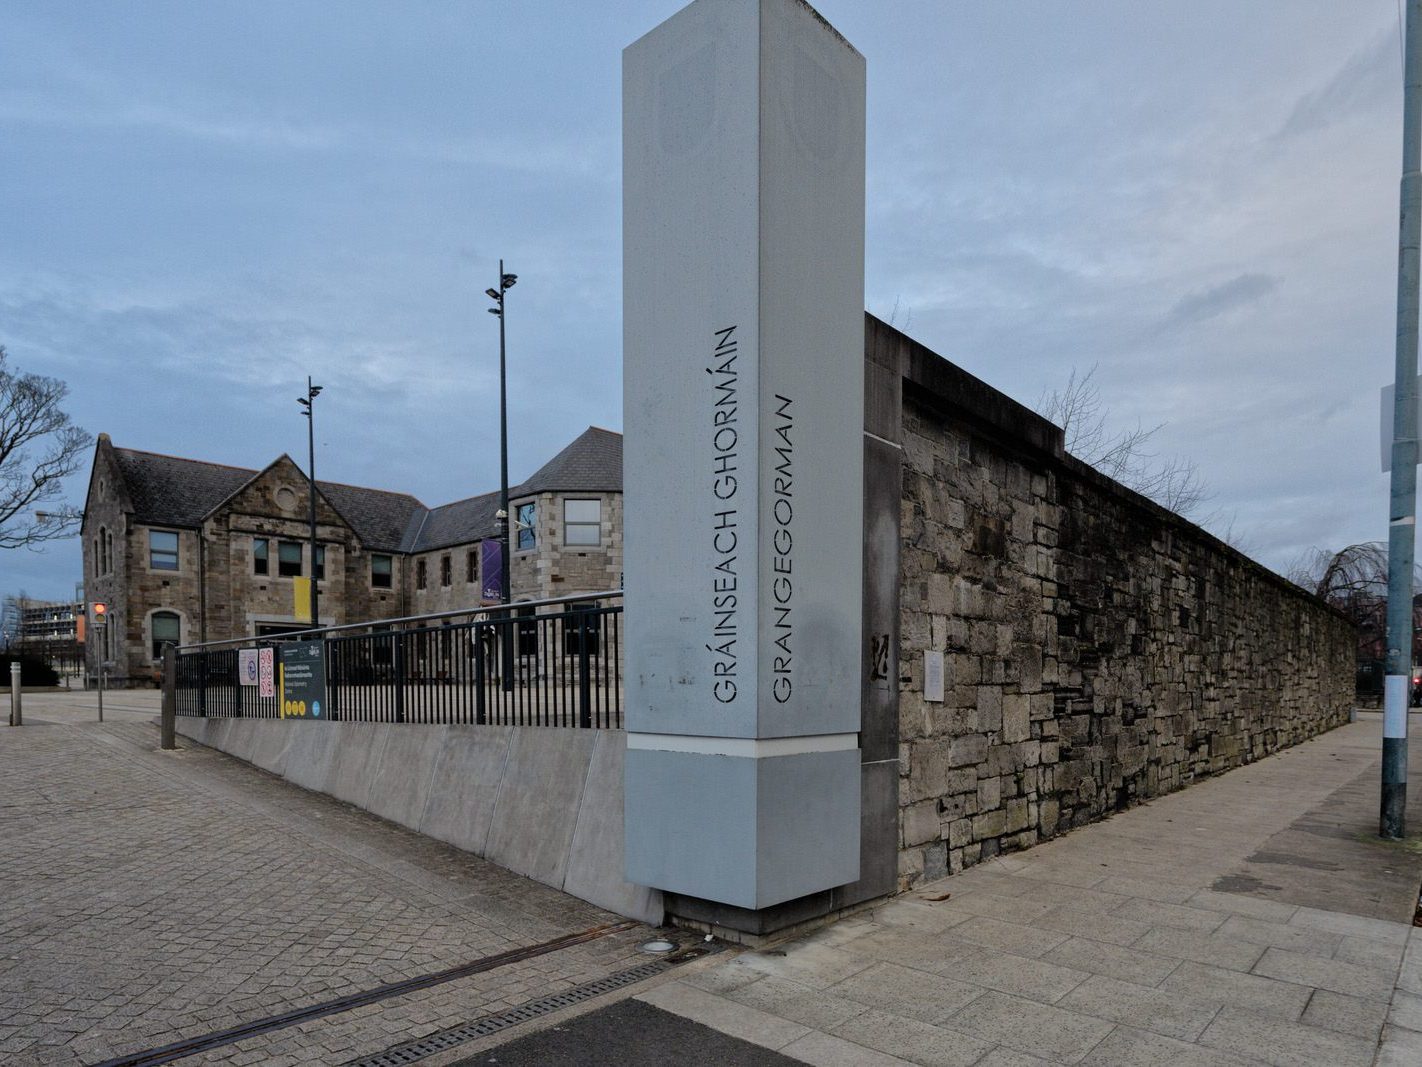 I VISITED THE GRANGEGORMAN UNIVERSITY CAMPUS [THERE WAS NO SIGN OF CHRISTMAS CELEBRATIONS THERE]-226043-1